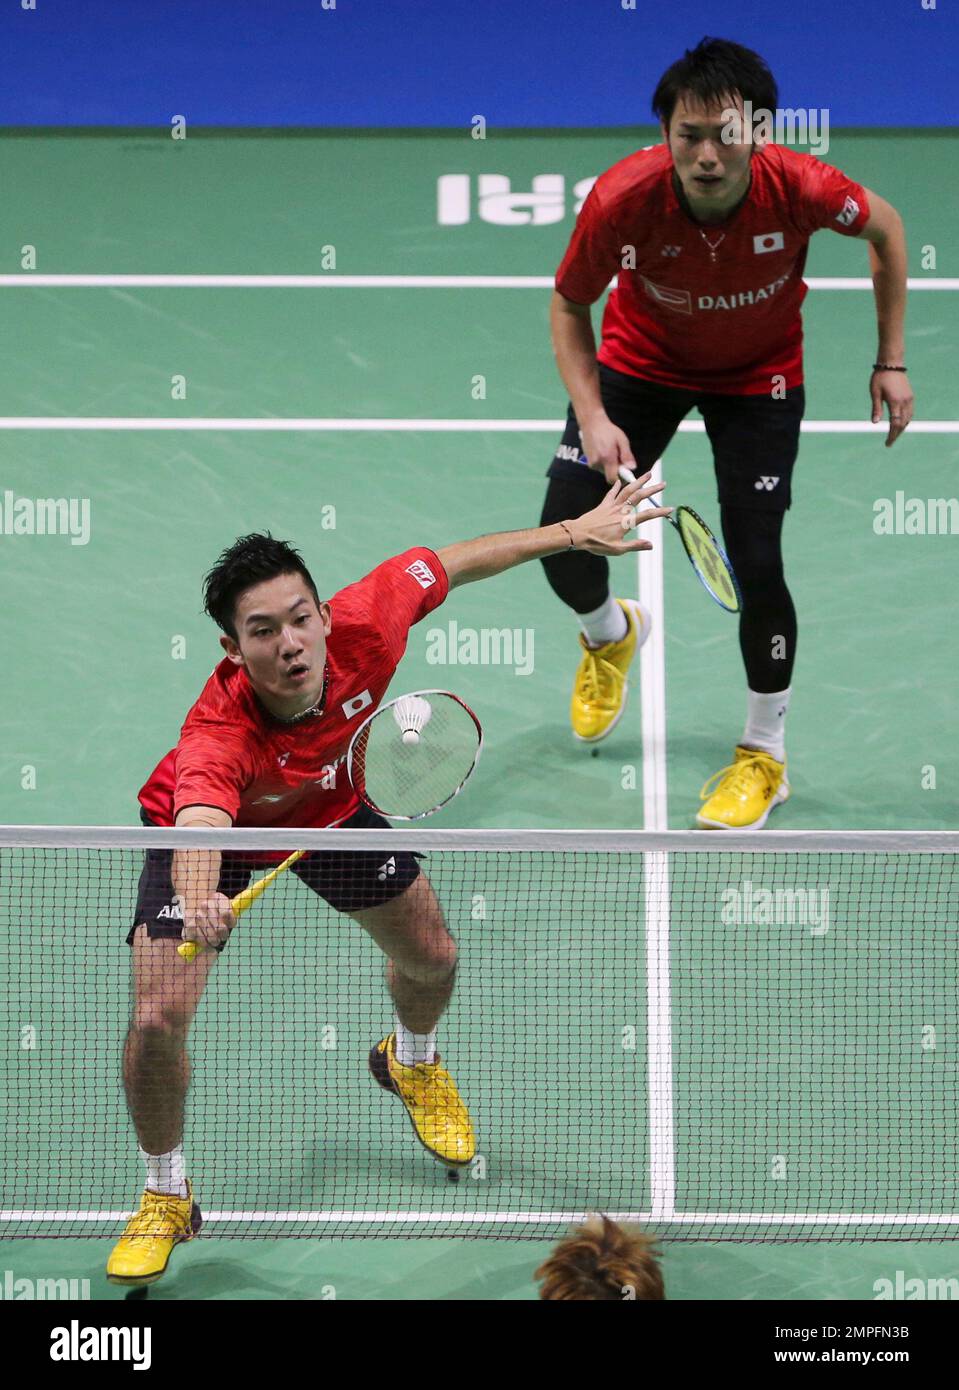 Indonesias Marcus Fernaldi Gideon, front, and Kevin Sanjaya Sukamuljo compete against Denmarks Kim Astrup and Anders Skaarup Rasmussen during their mens doubles badminton group stage match at the BWF World Tour Finals